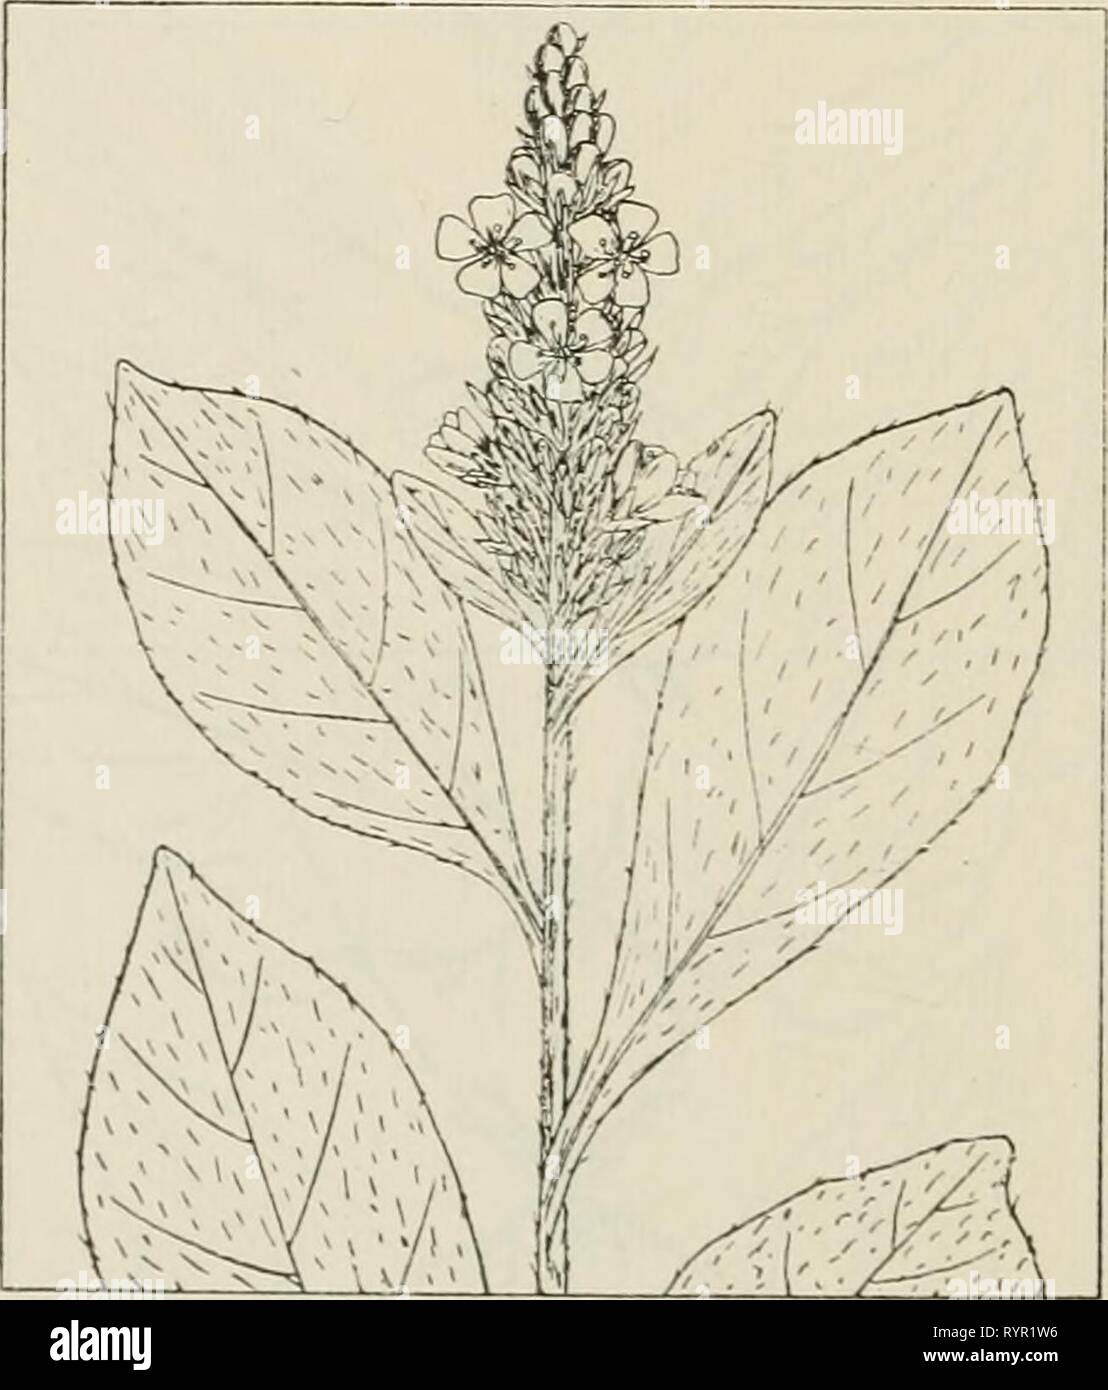 The drug plants of Illinois The drug plants of Illinois . drugplantsofilli44teho Year: 1951  USTILAGO ZEAE. Corn smut. Usti- laginaceae.—A fungus parasite on Indian corn {Zea mays L.) appearing as large masses or galls of black, sooty powder on the ears, stem nodes, and tassels, and small to large pustules on all other parts of the plant. The large galls from the ears, stems, and tassels are collected. Abundant in cornfields throughout the state. Contains resins, mazenic acid, and the alkaloid ustalagine. Used as an ecbolic and antihemorrhagic. VALERIANA OFFICINALIS L. Heliotrope, common valer Stock Photo